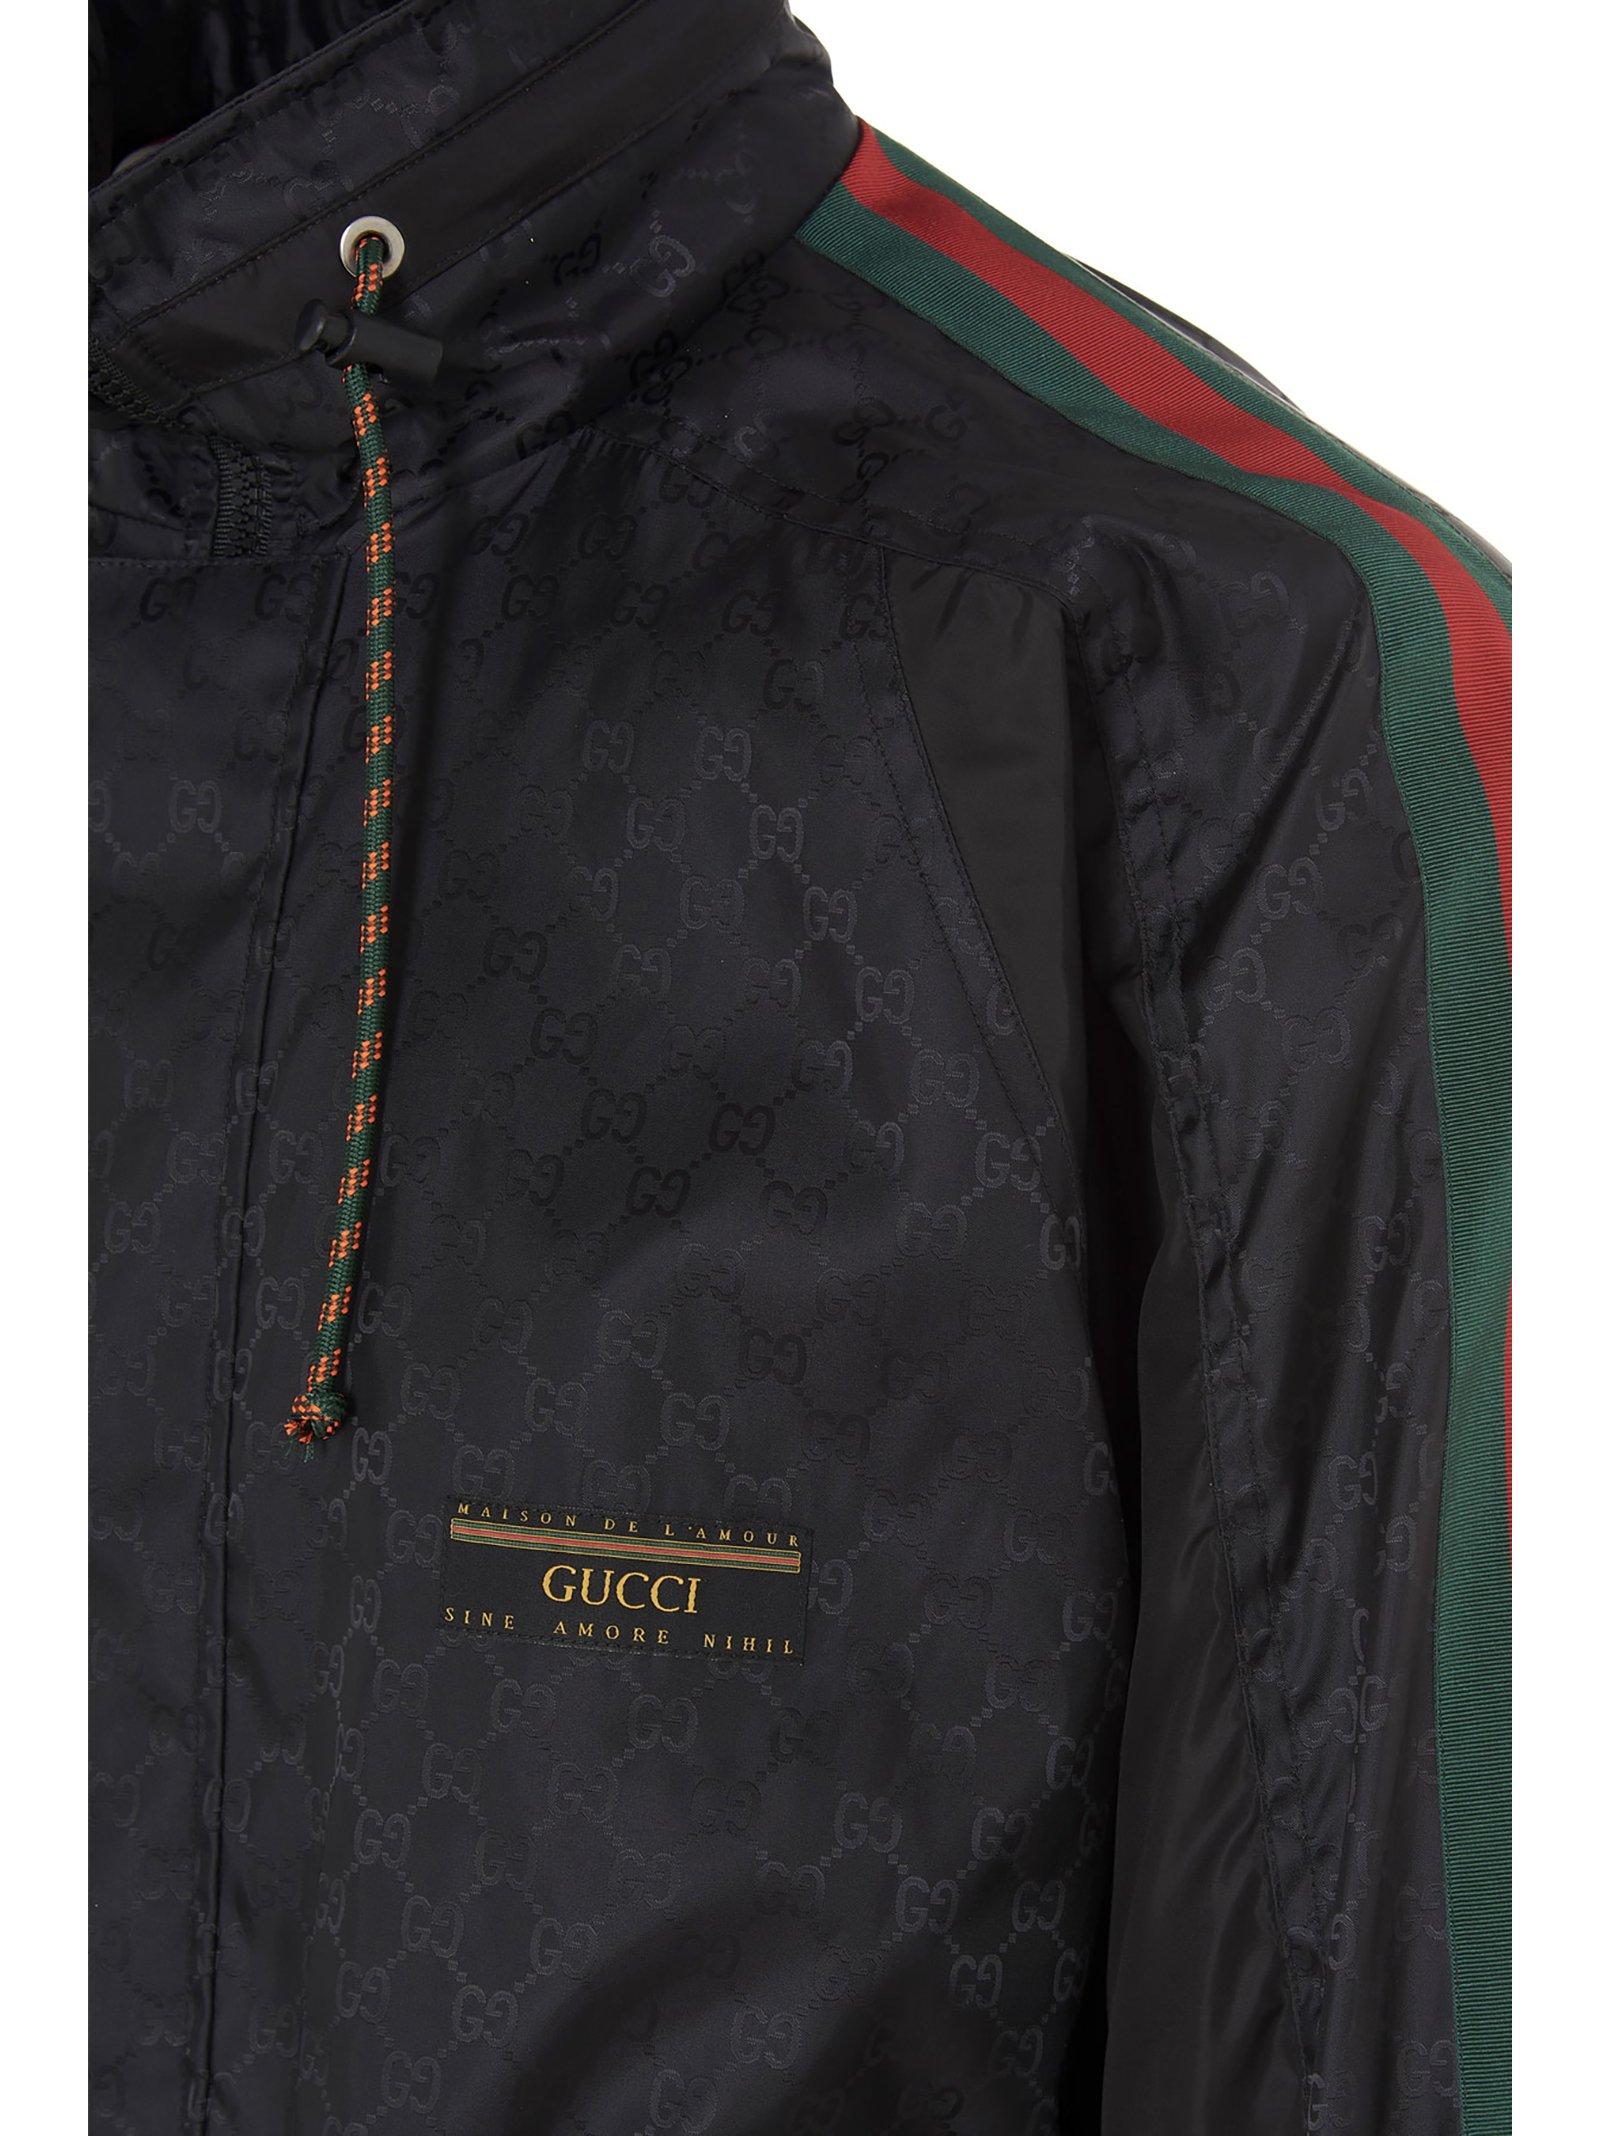 Gucci Synthetic GG Jacquard Jacket in Black for Men - Lyst